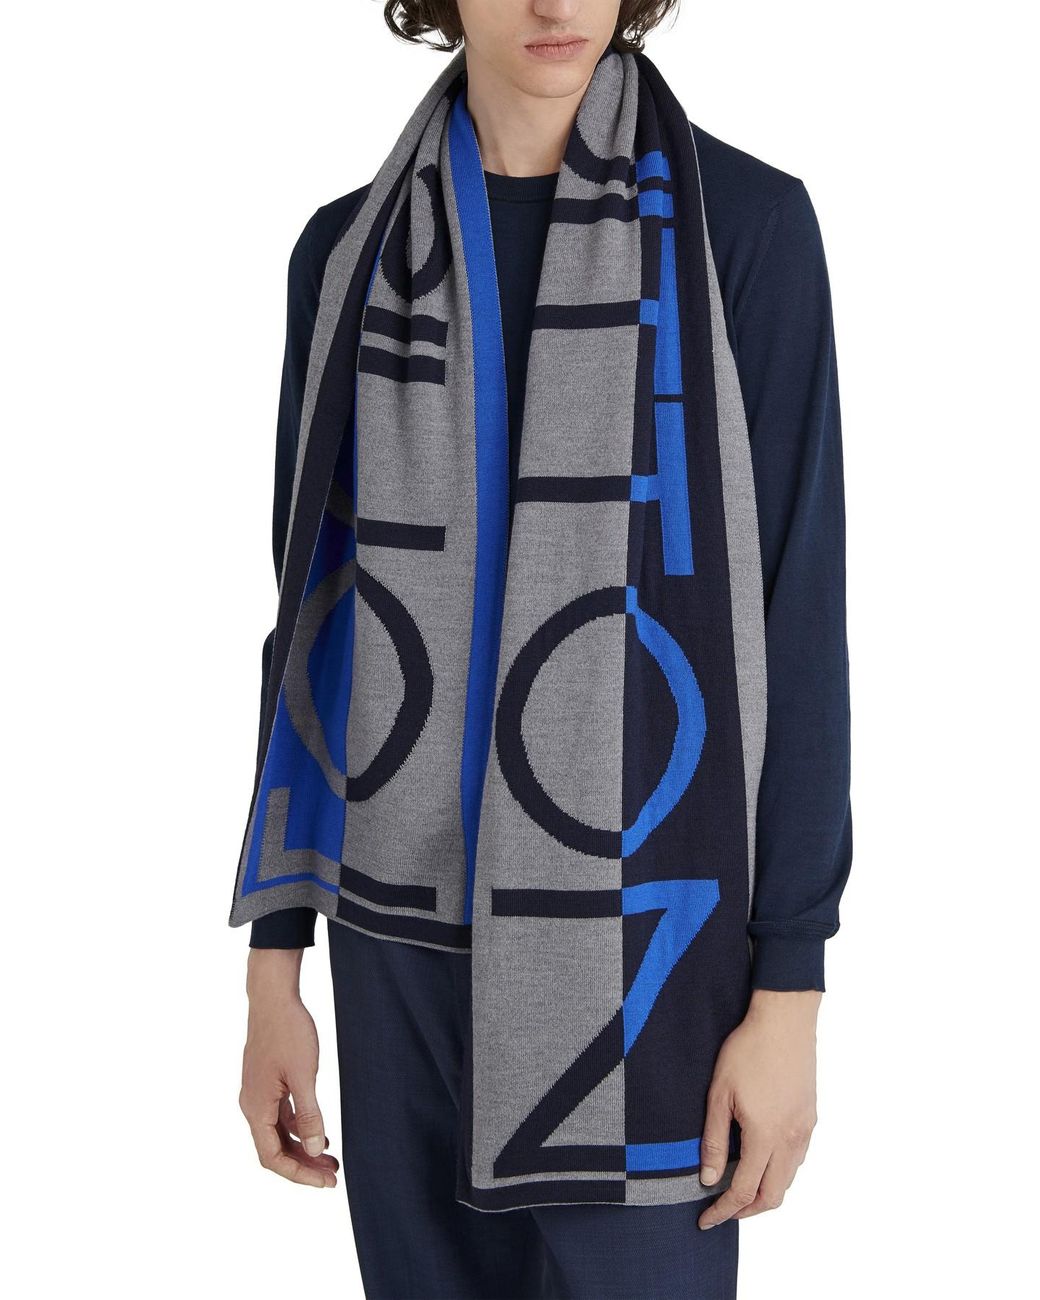 Men's Louis Vuitton Scarves and mufflers from A$503